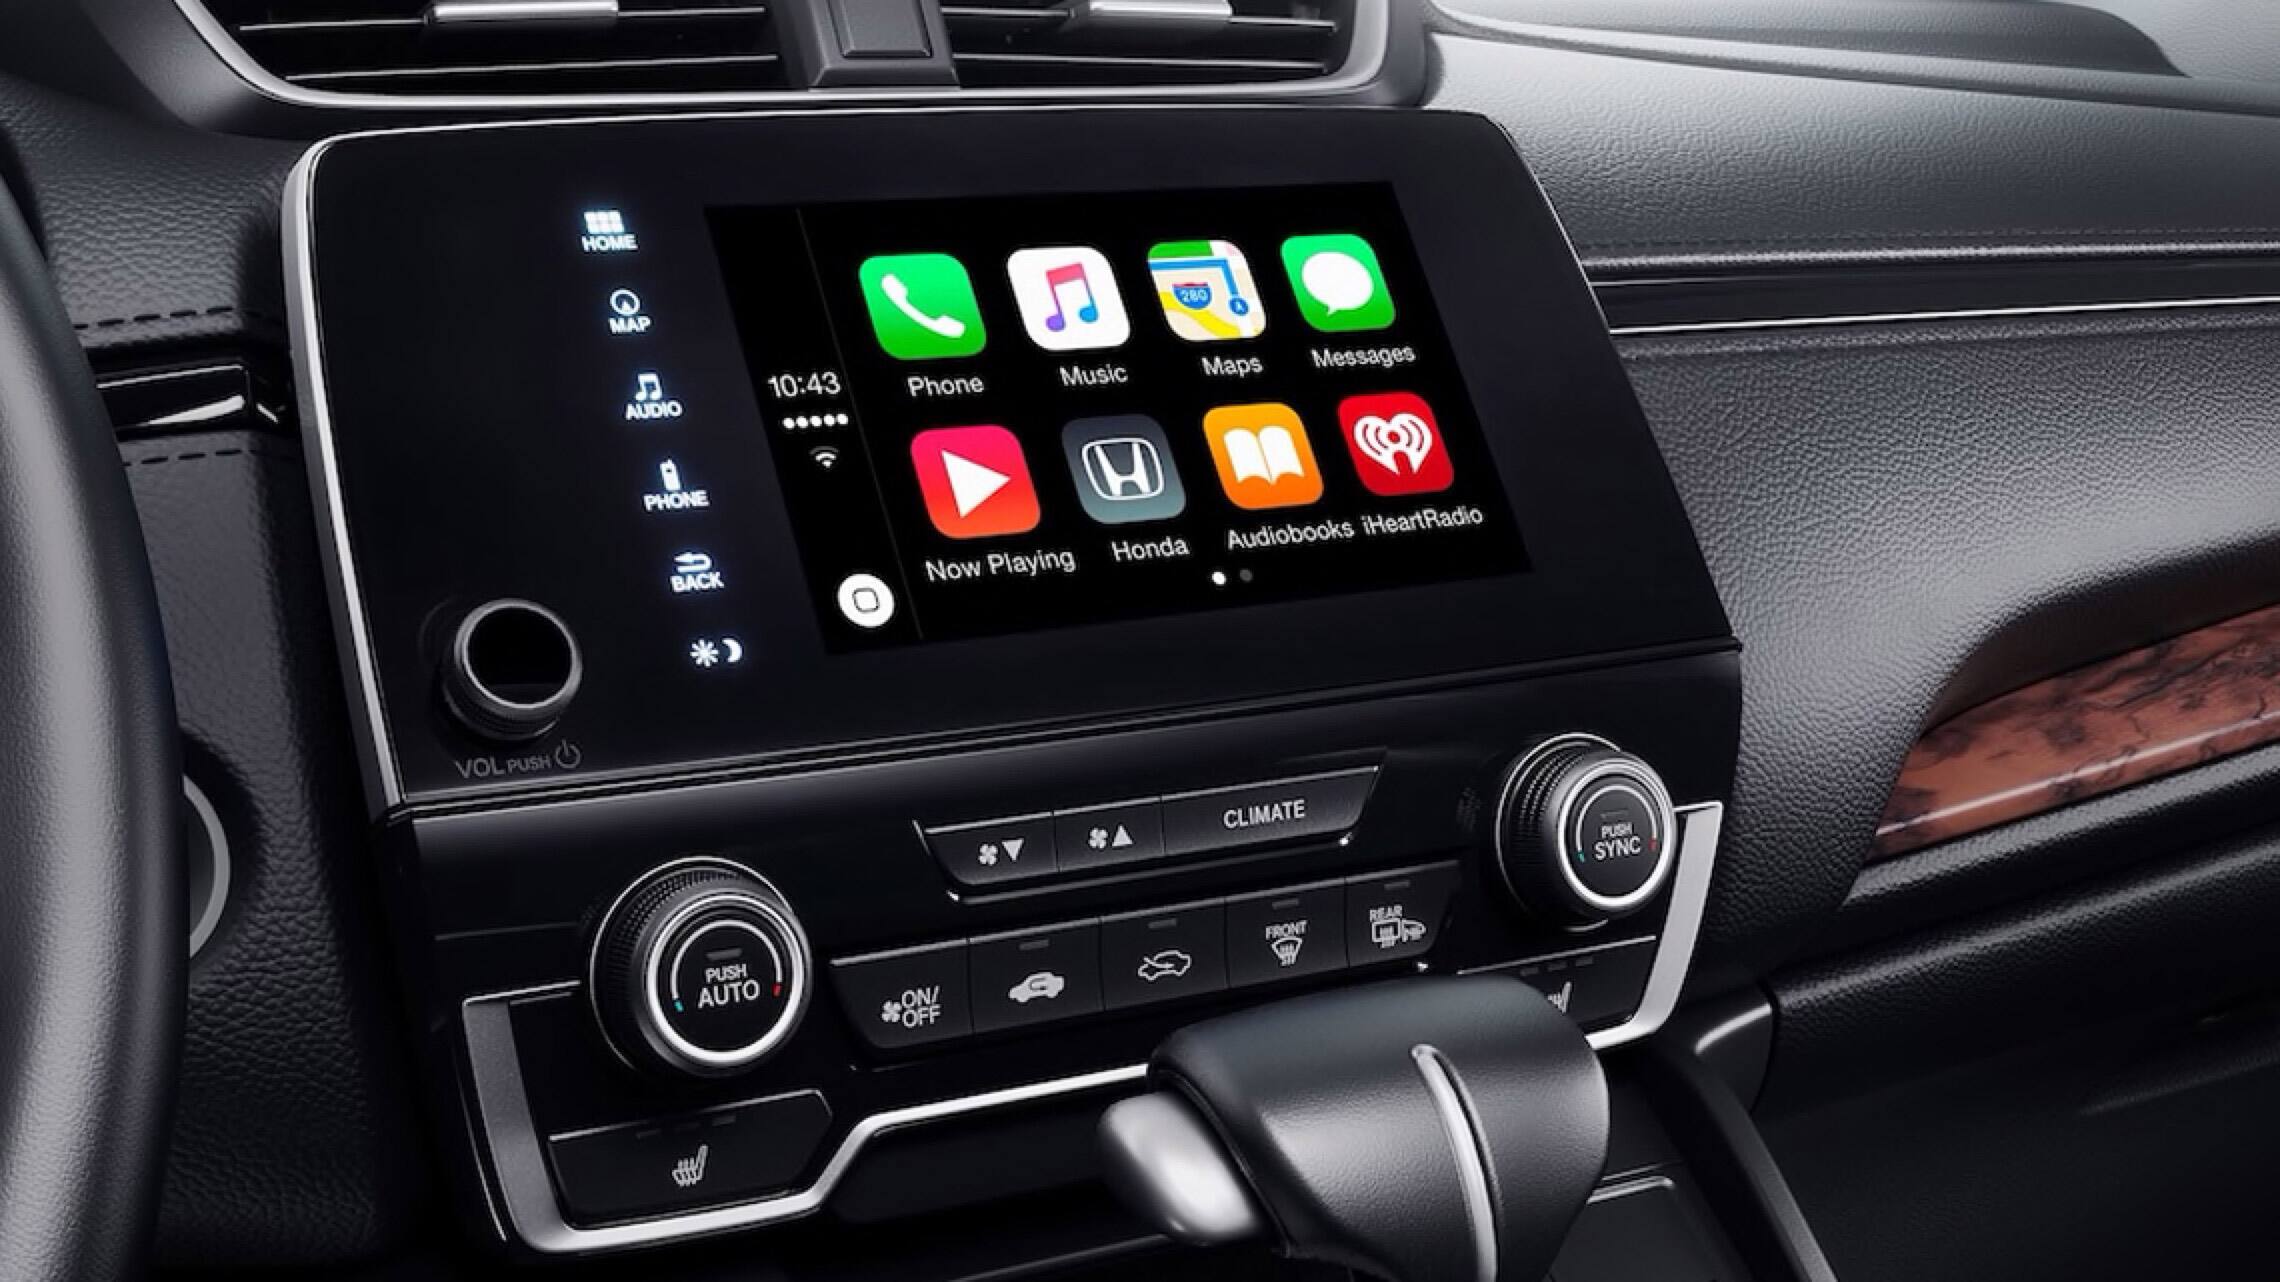 Display Audio touch-screen with Apple CarPlay® integration menu in the 2019 Honda CR-V.